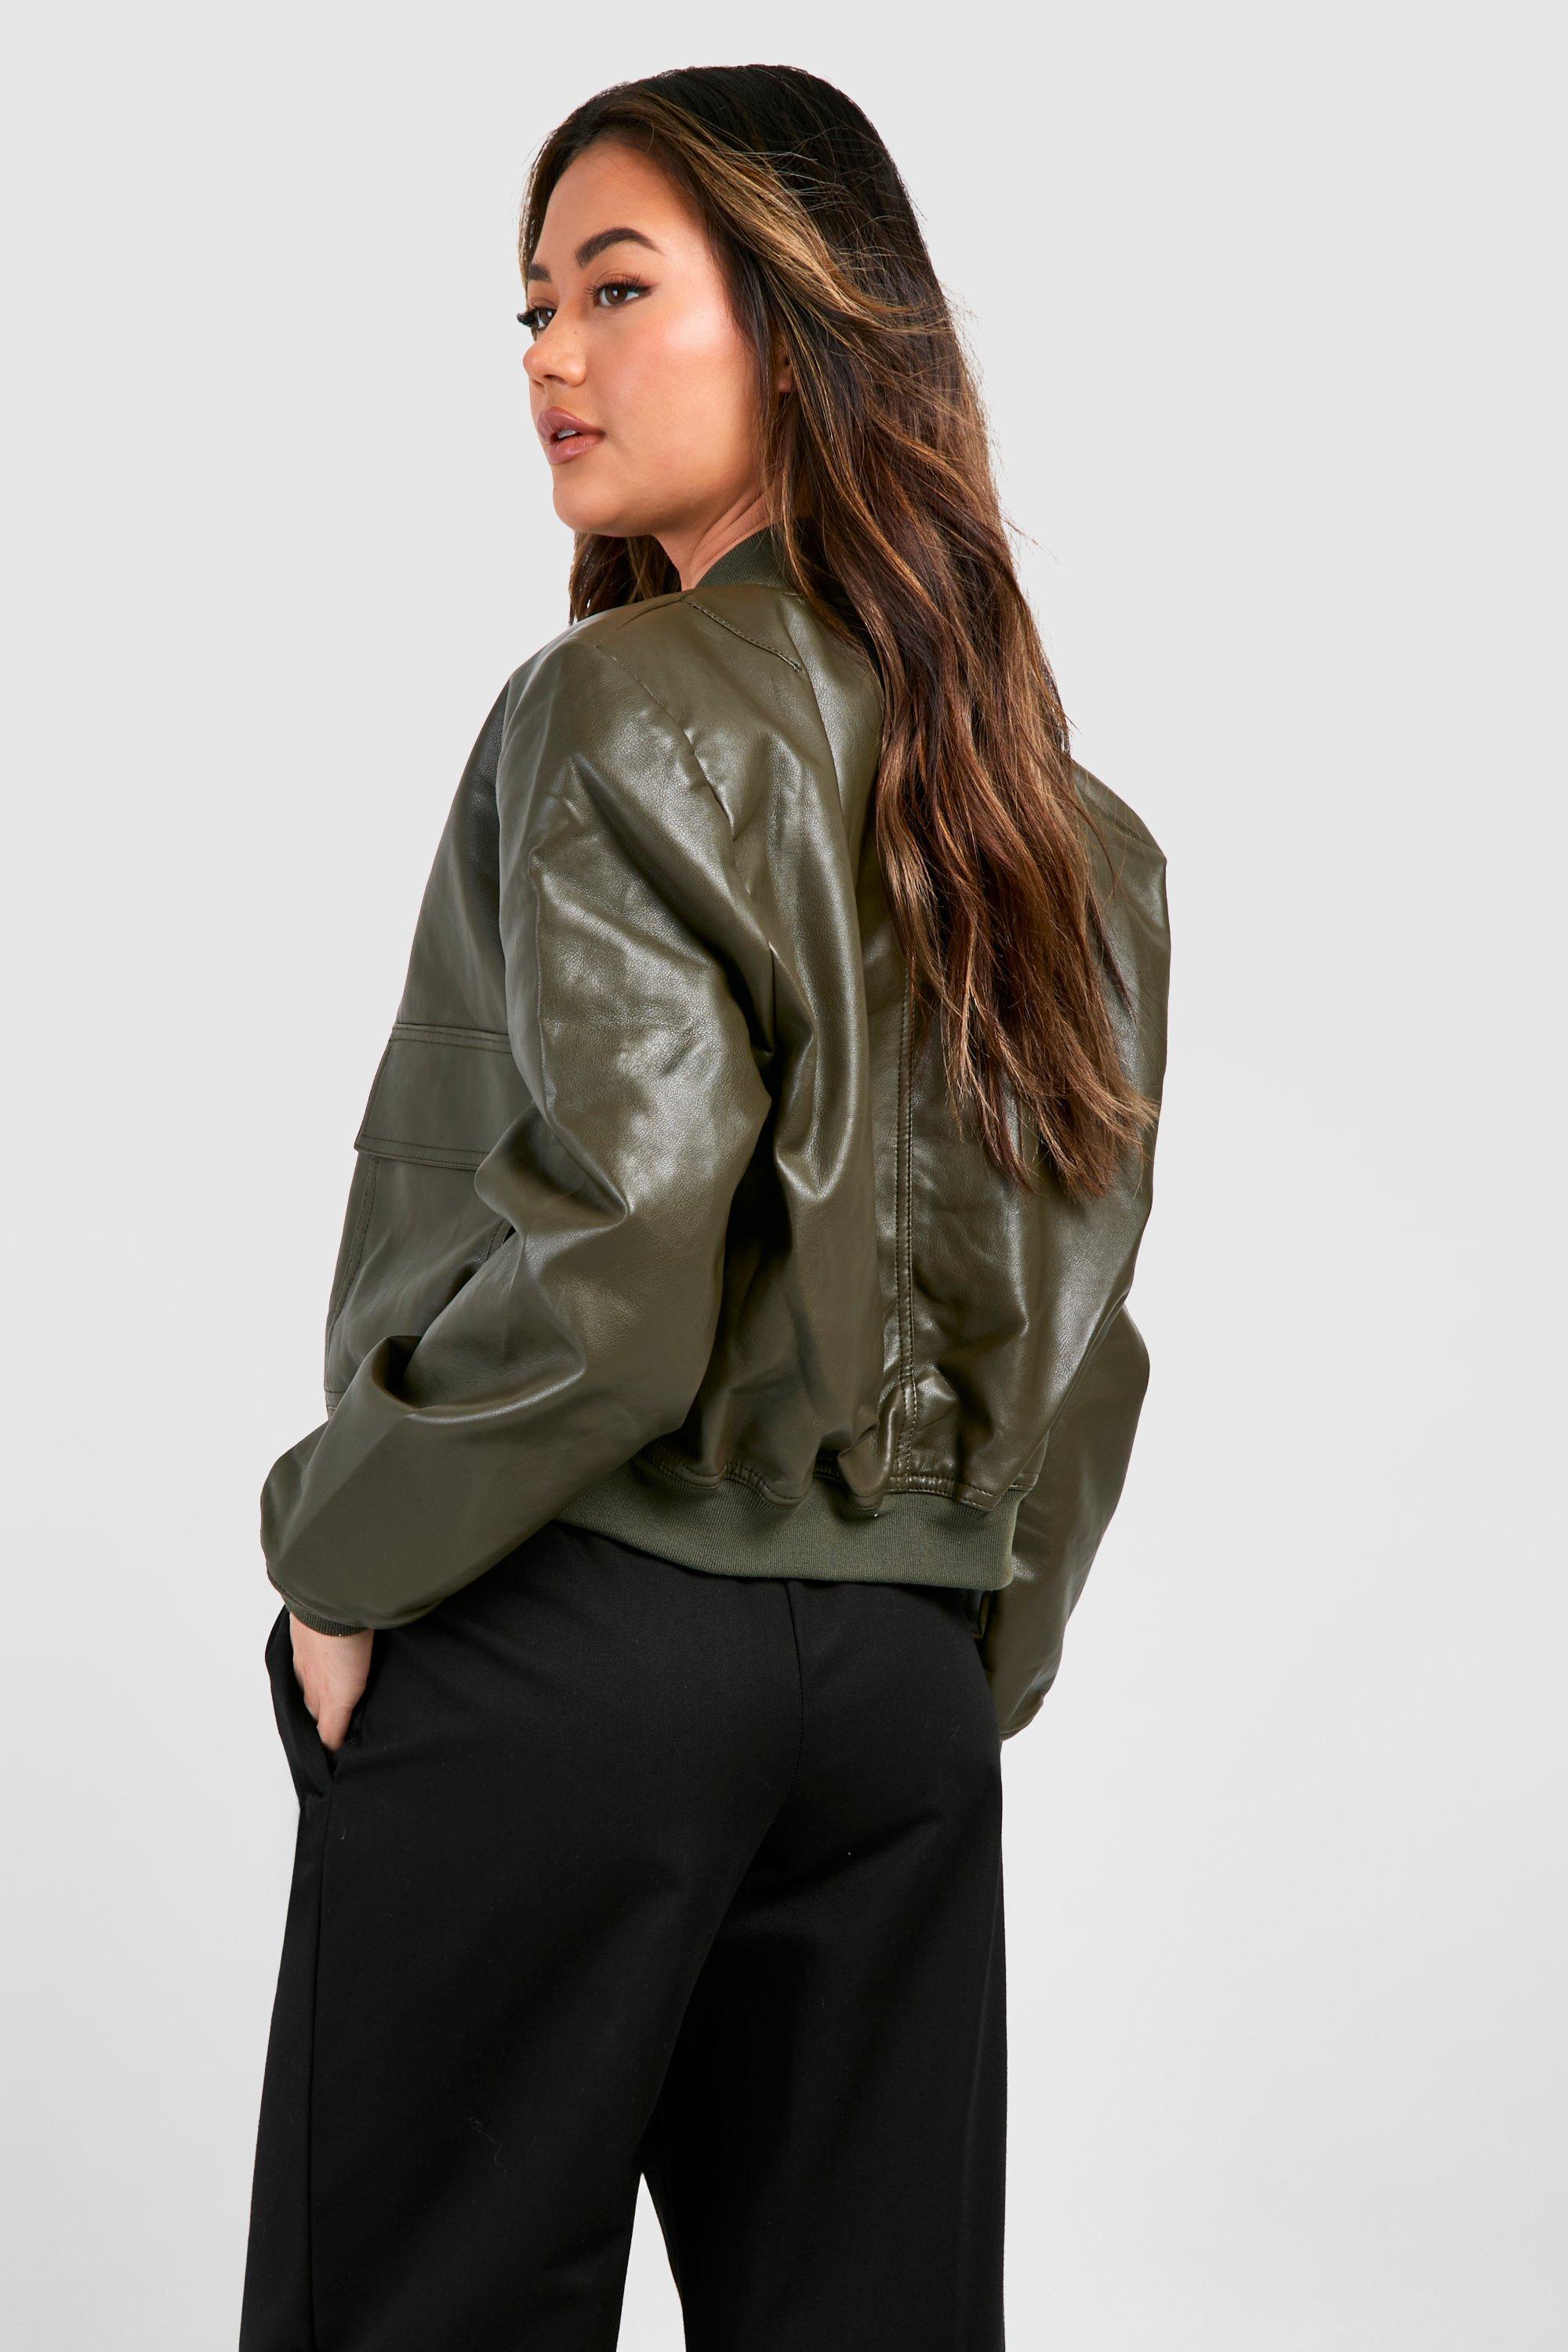 Boohoo Pocket Detail Faux Leather Bomber Jacket in Brown